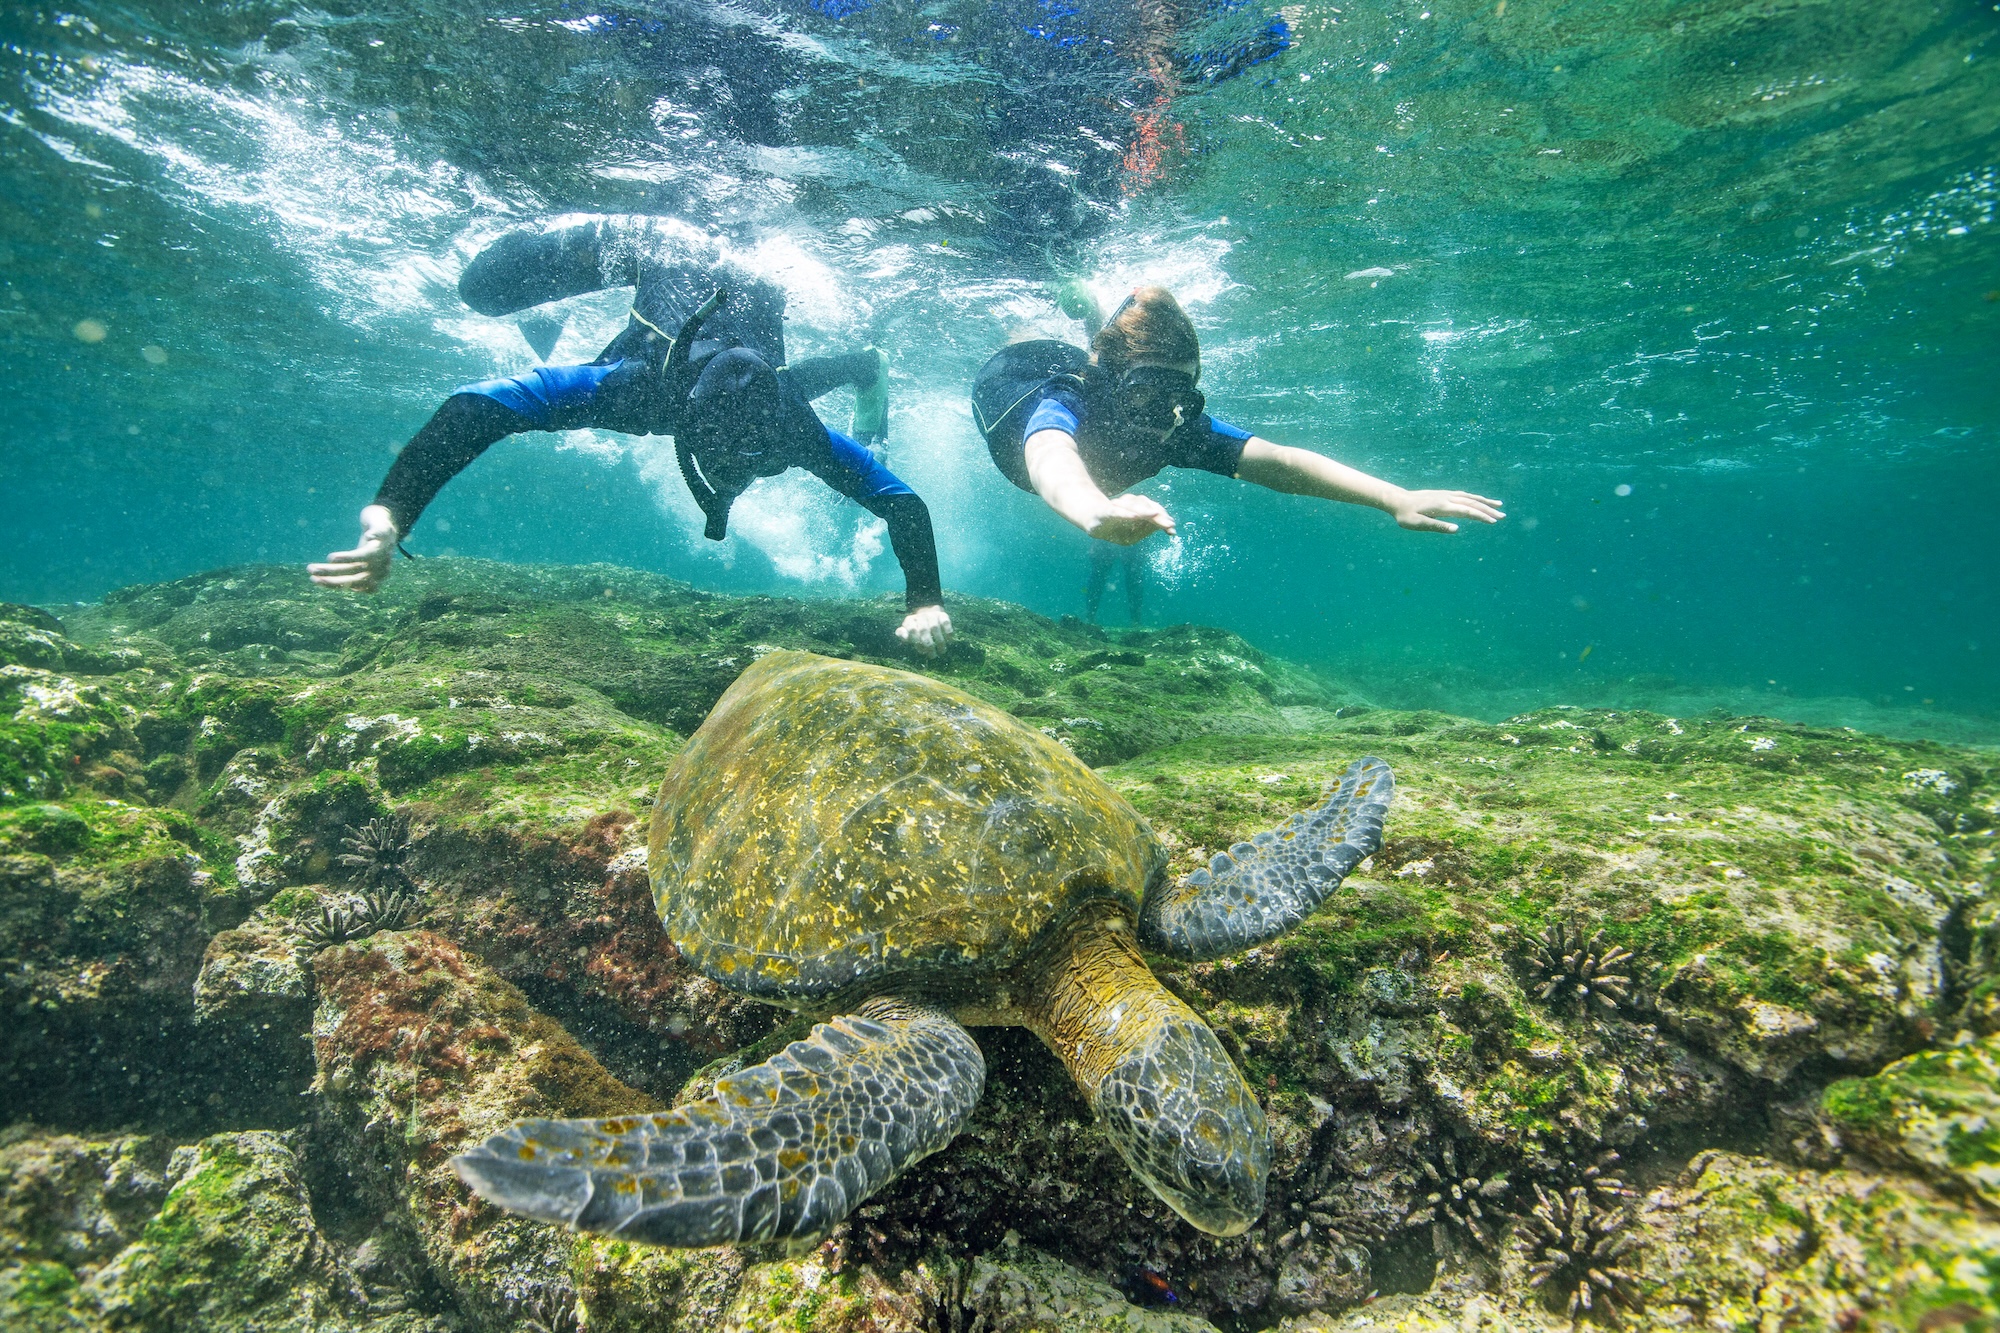 Ring in the Galápagos National Park’s 65th Anniversary with Top Sustainability Initiatives